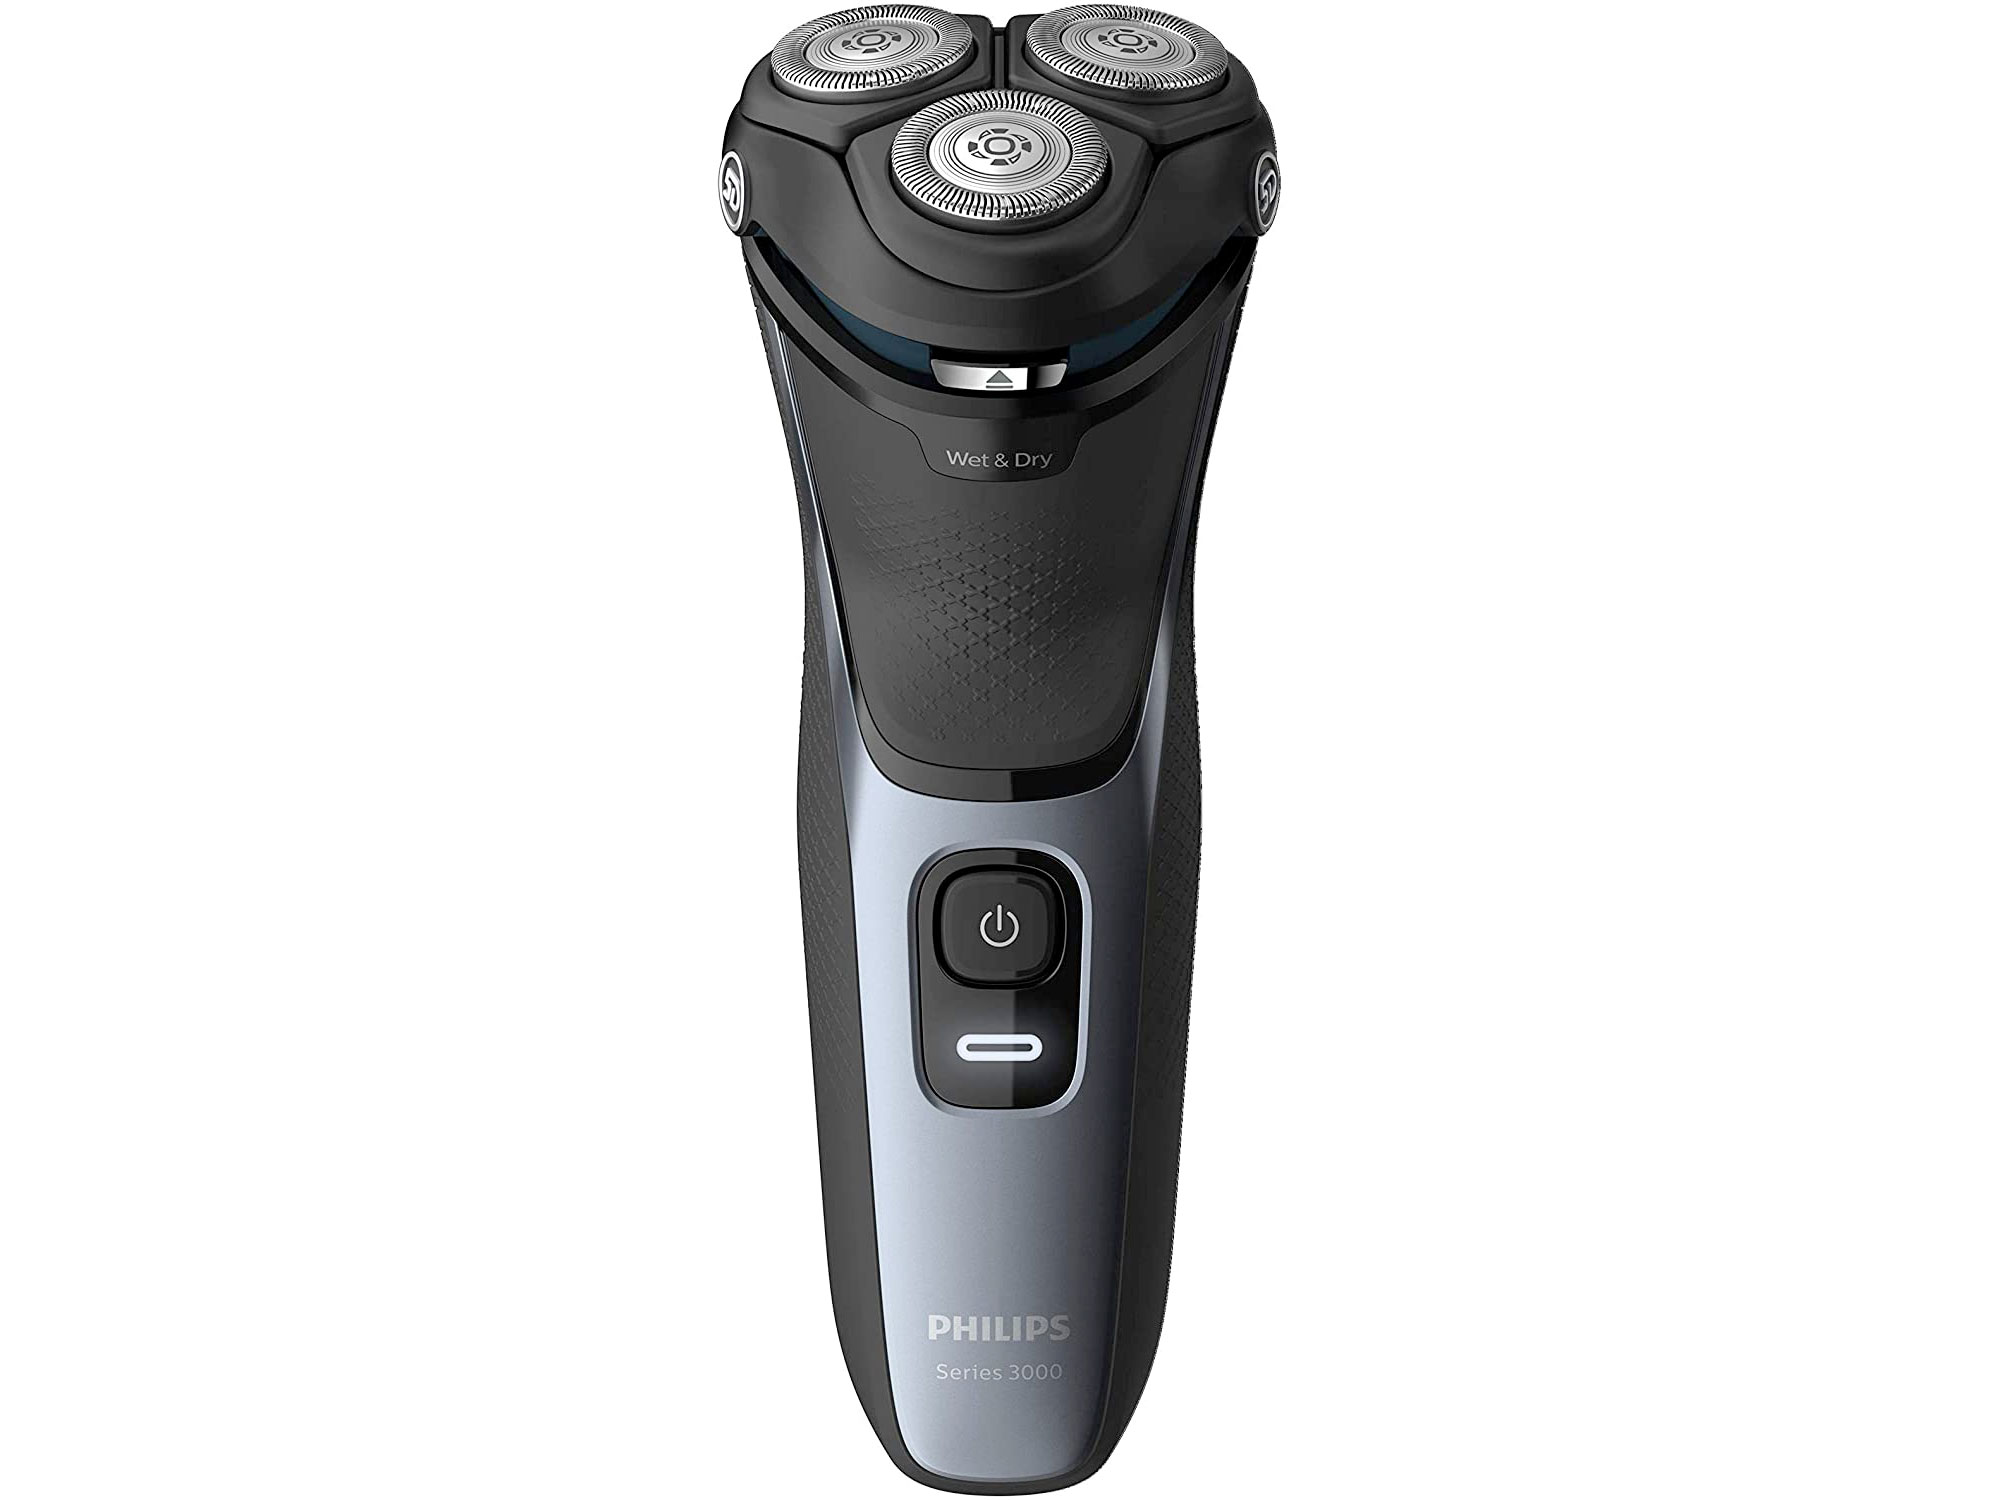 Amazon：Philips Shaver Series 3000 with Pop-Up Trimmer只賣$49.20